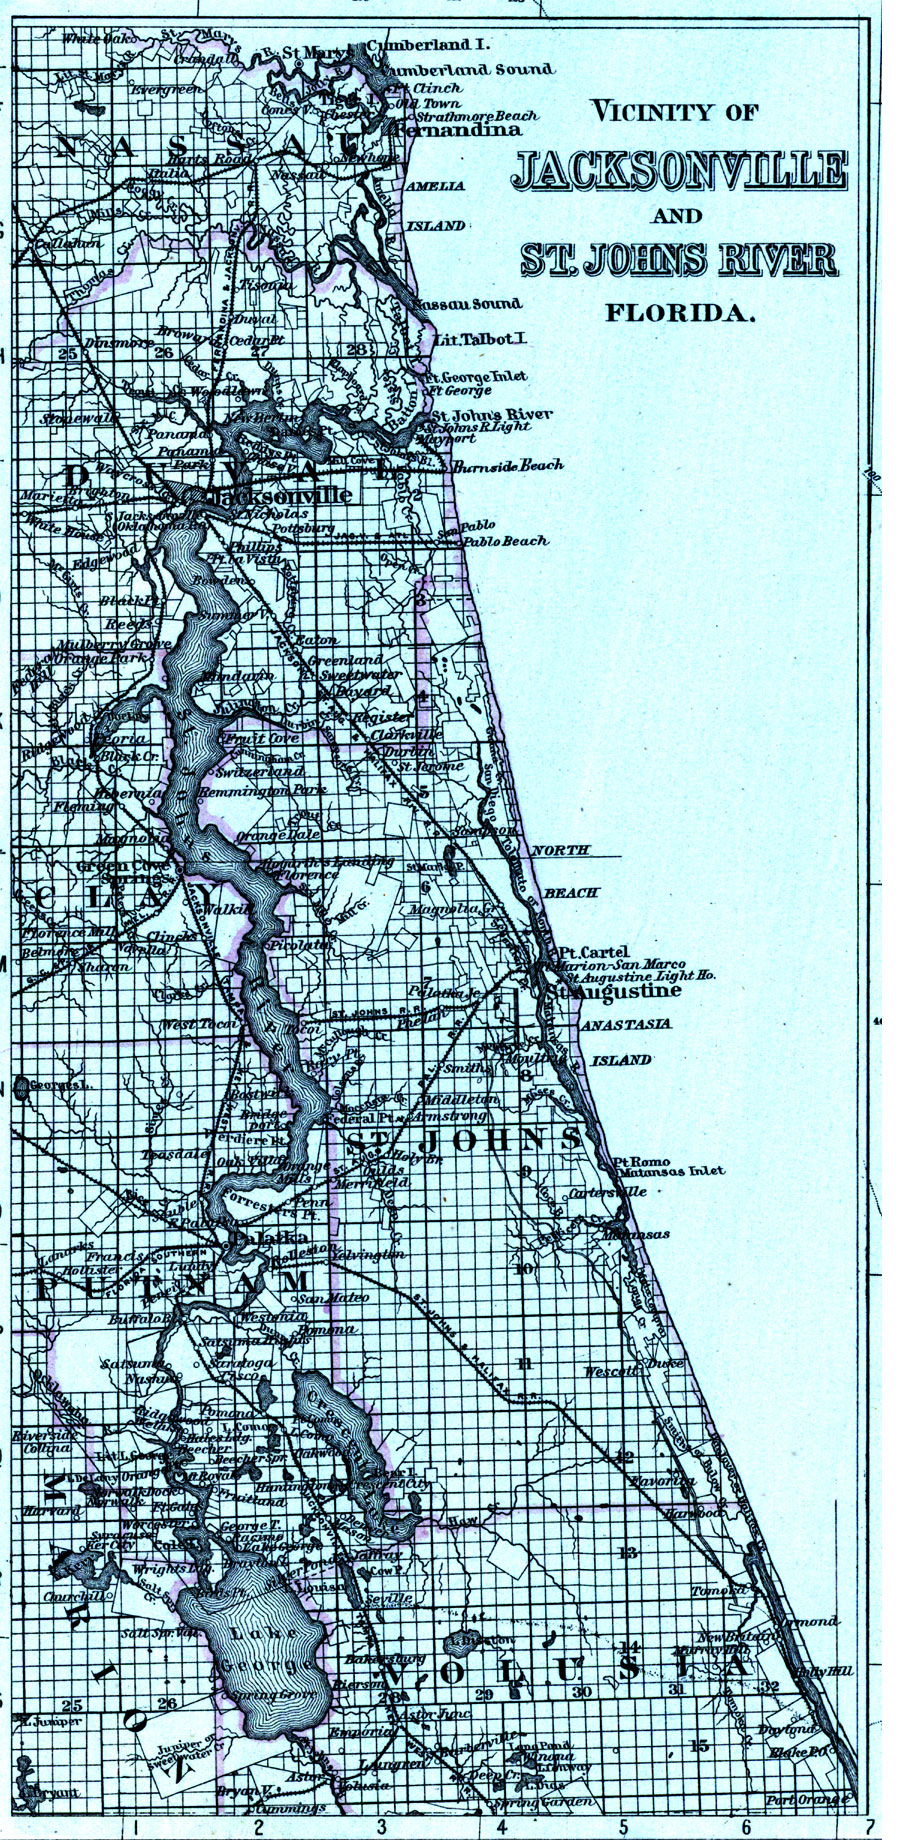 Vicinity of Jacksonville and St. Johns River, Florida